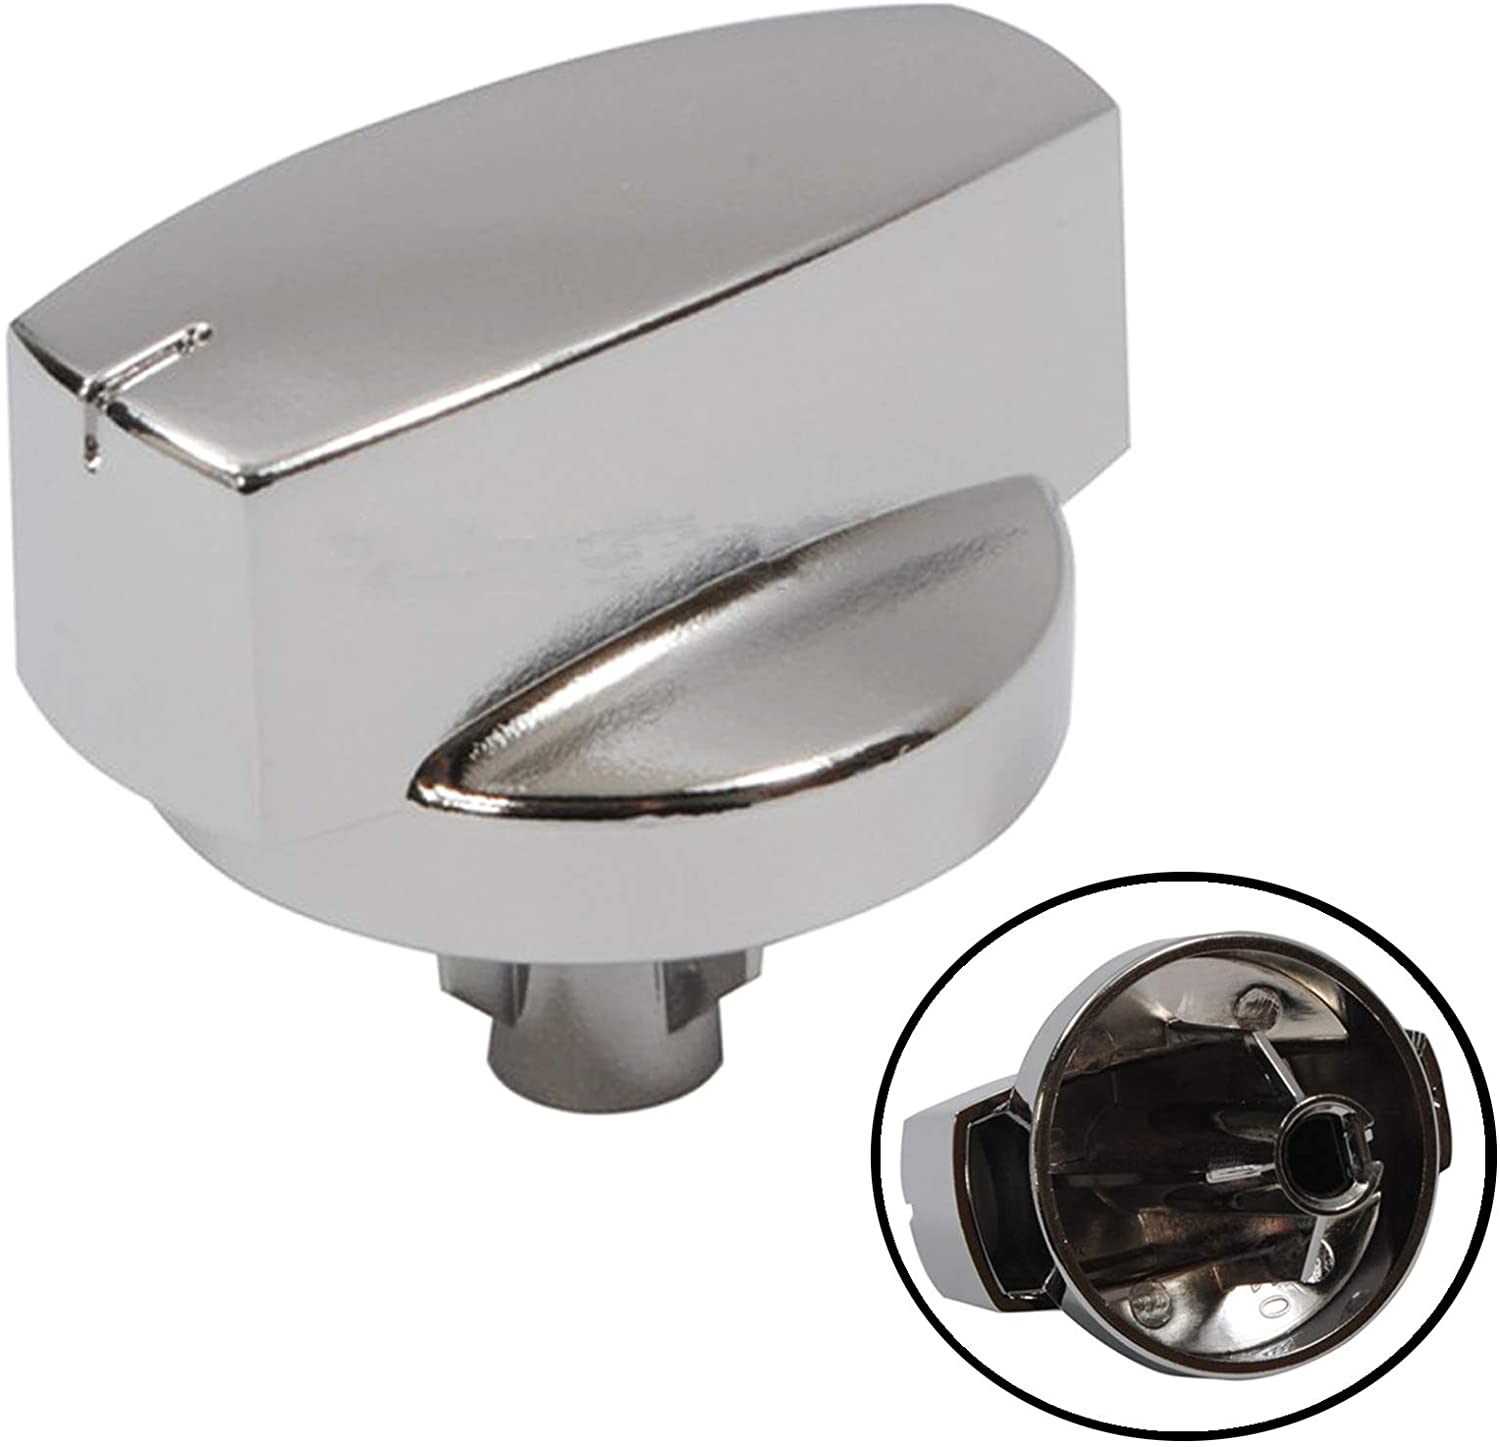 STOVES Oven Cooker Knob Function Control Switch 444445412 (Silver/Chrome)